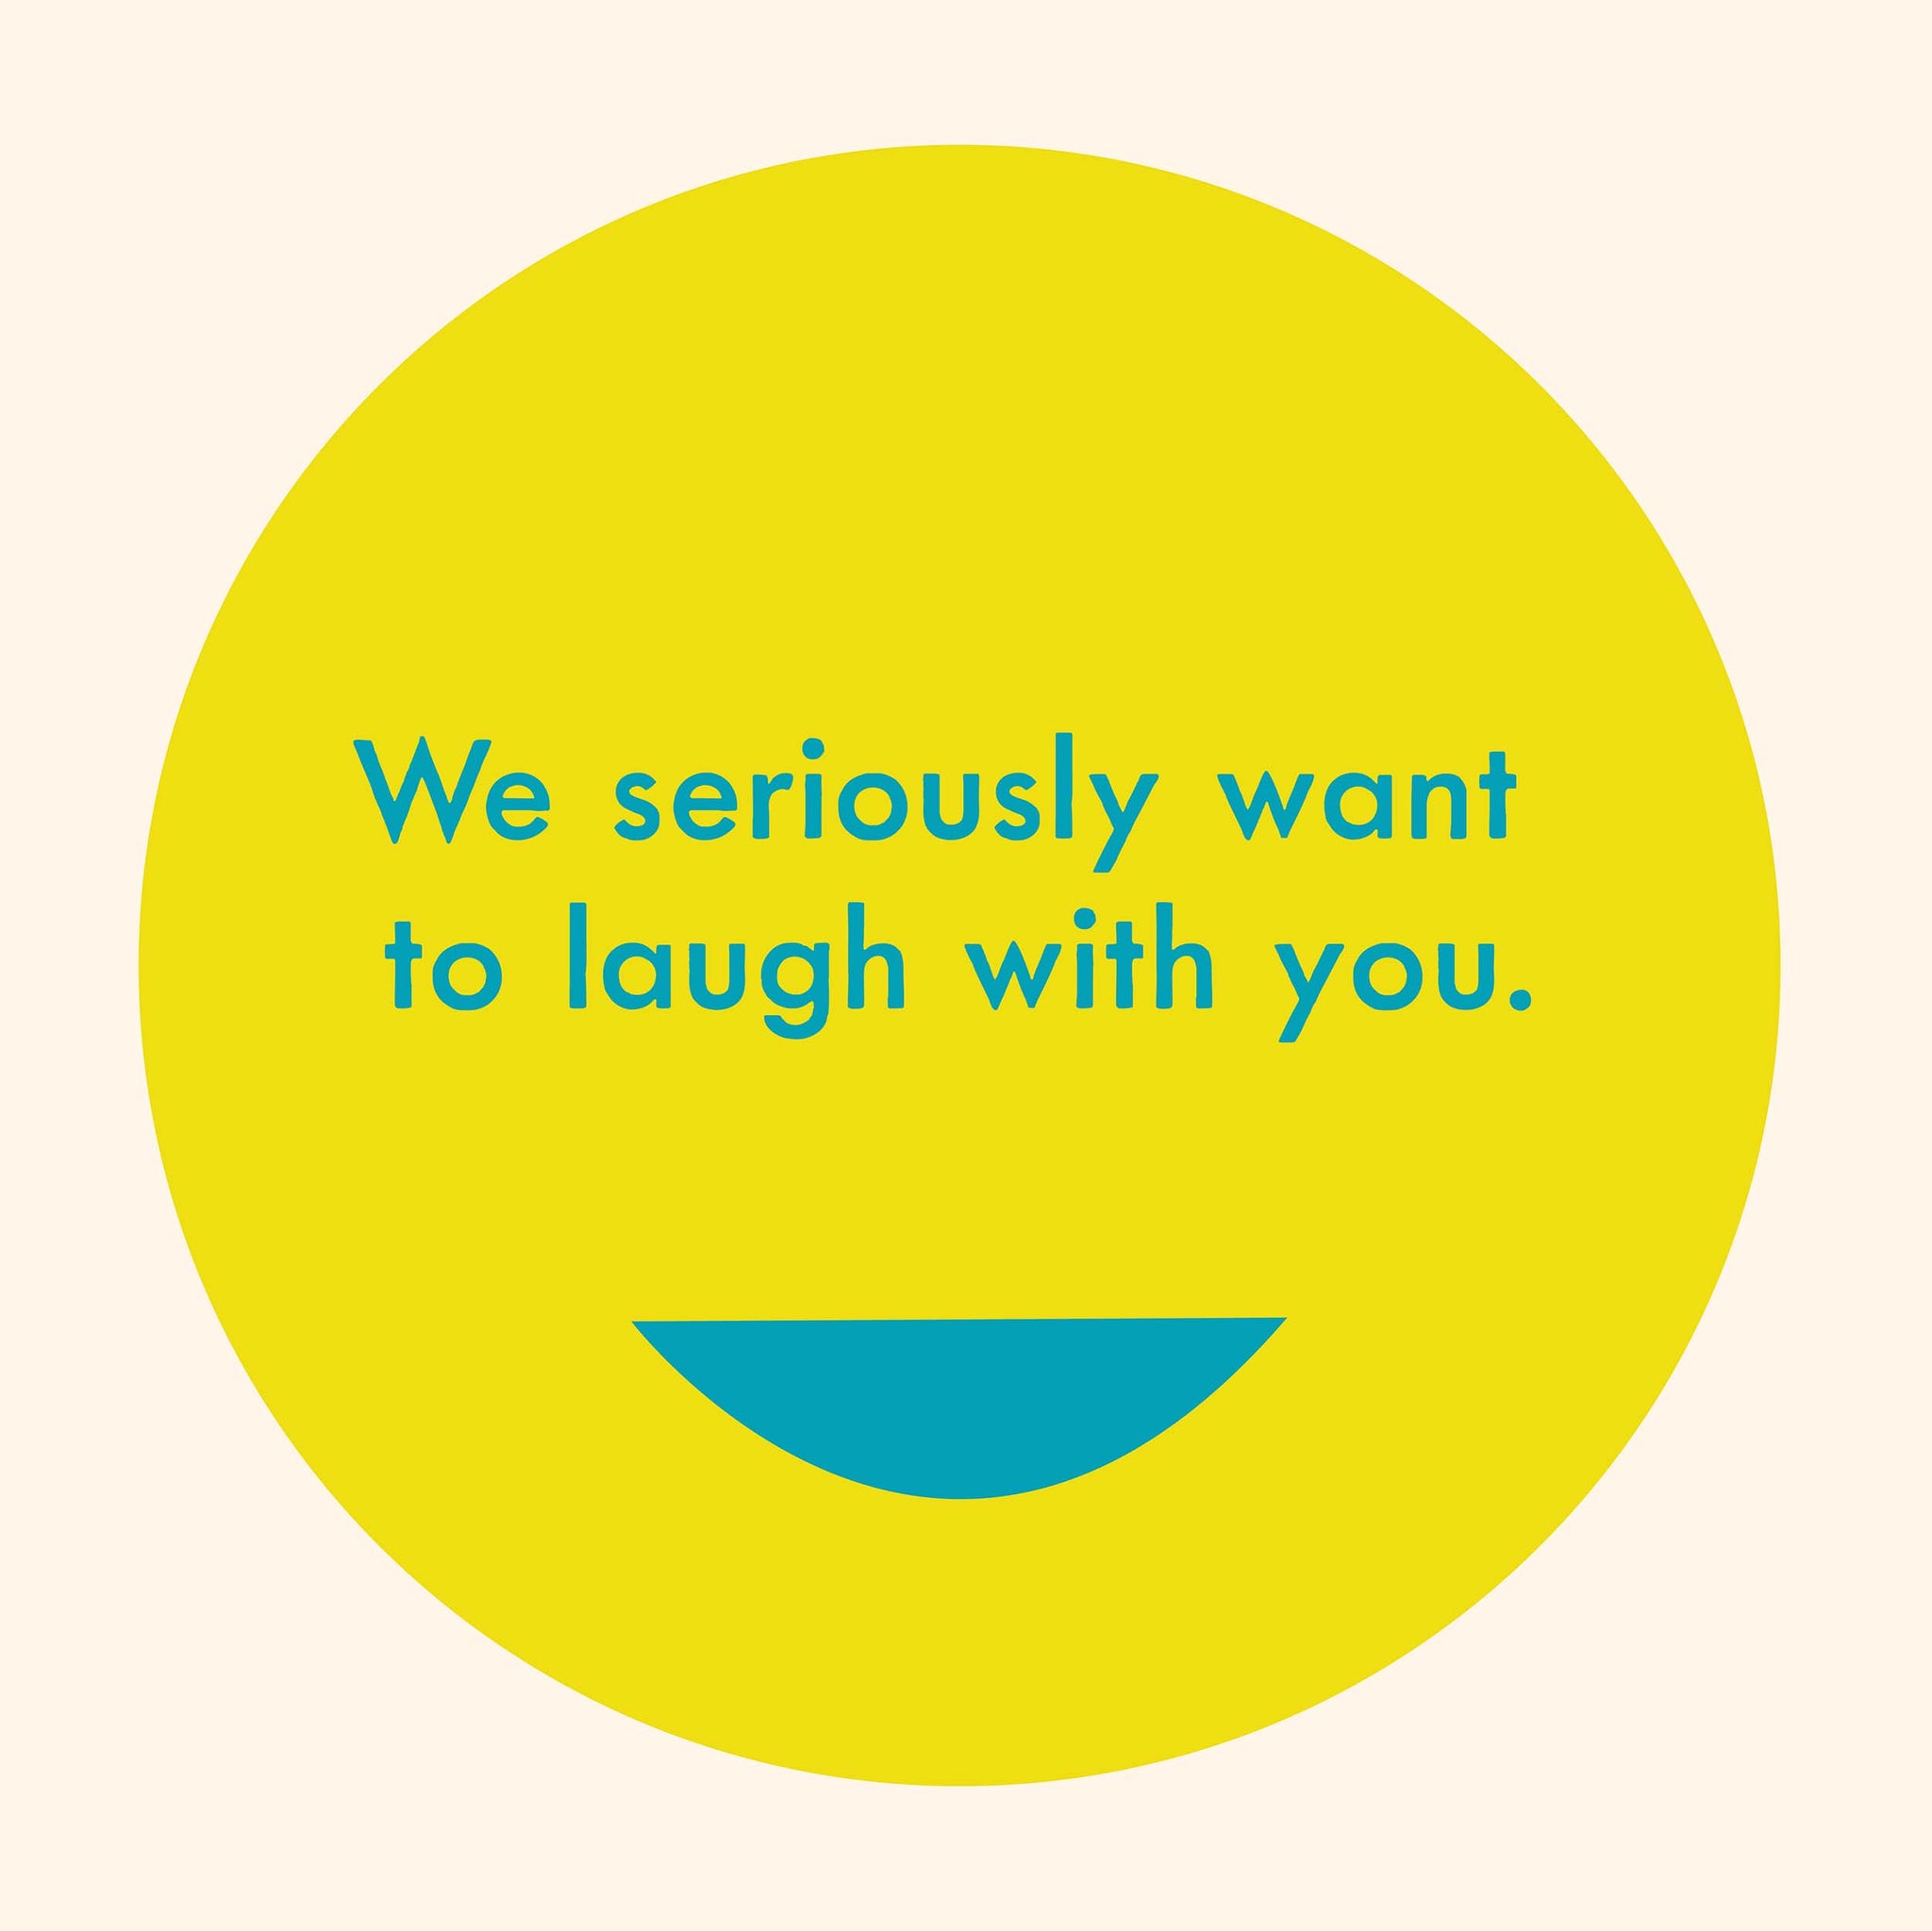 We seriously want to laugh with you.